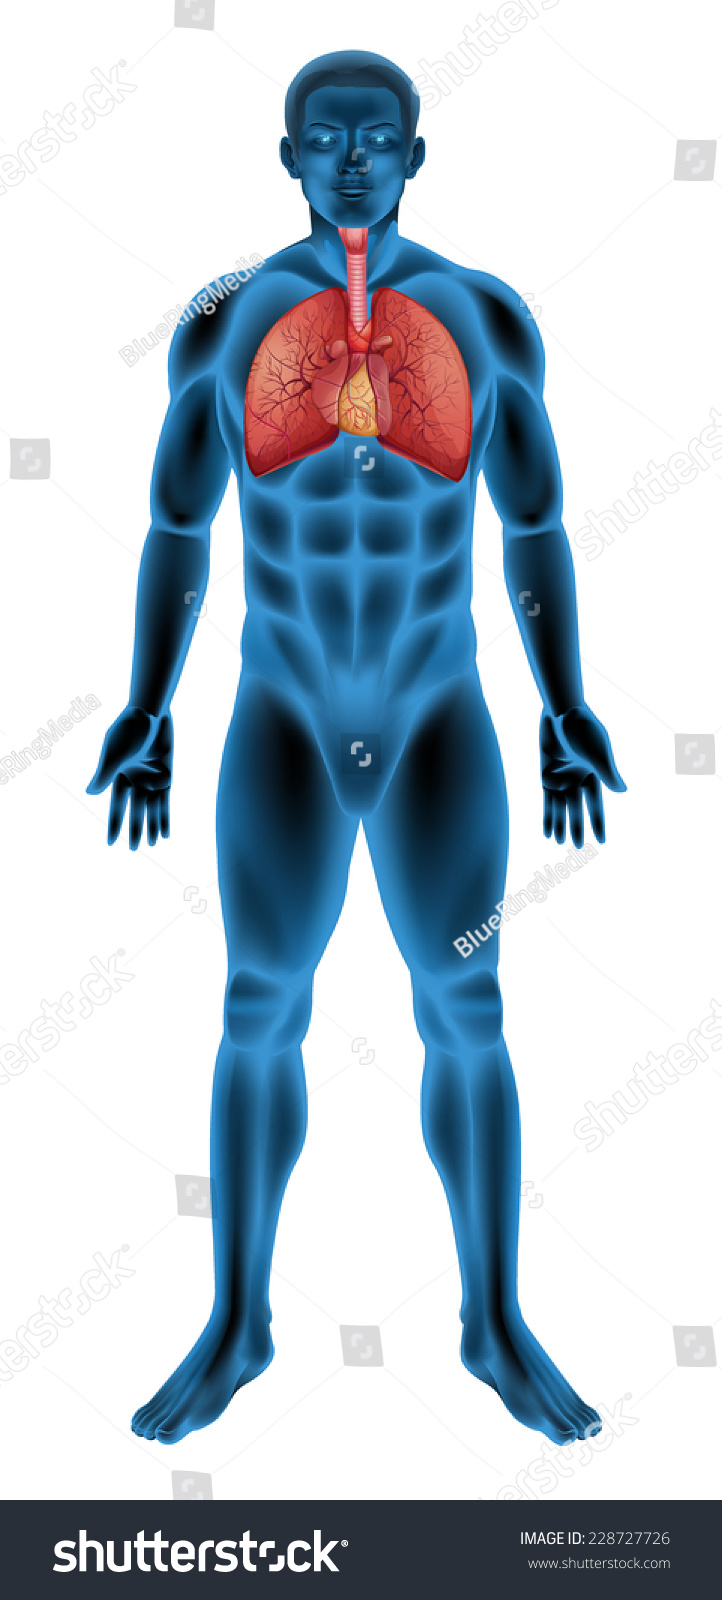 Anatomy Of The Human Respiratory System Stock Vector Illustration